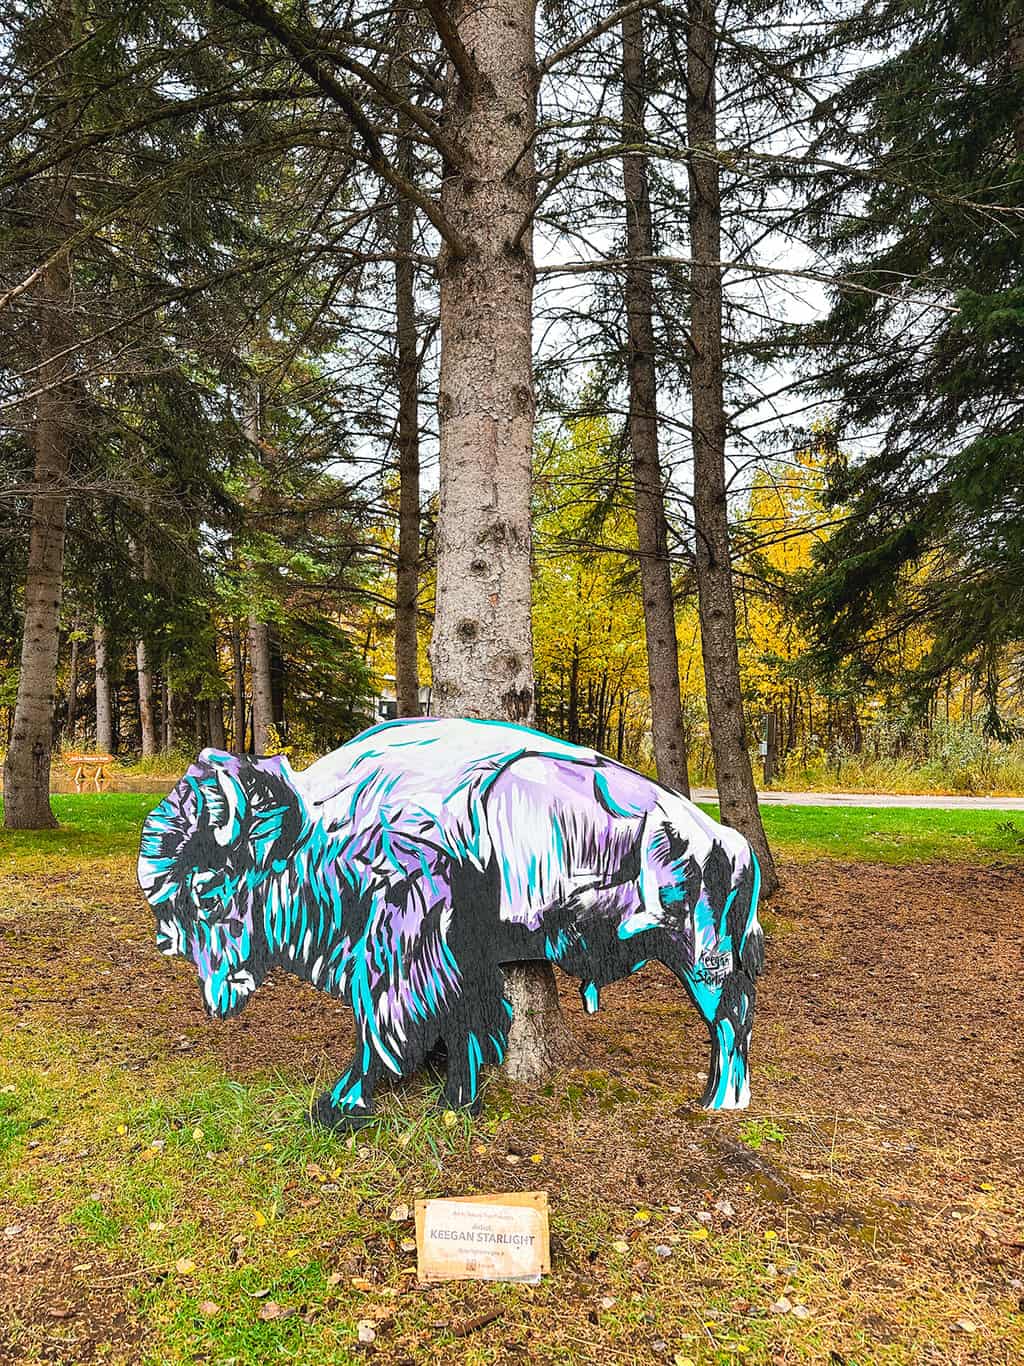 Art in Nature trail in the town of Banff in Banff National Park Alberta Canada